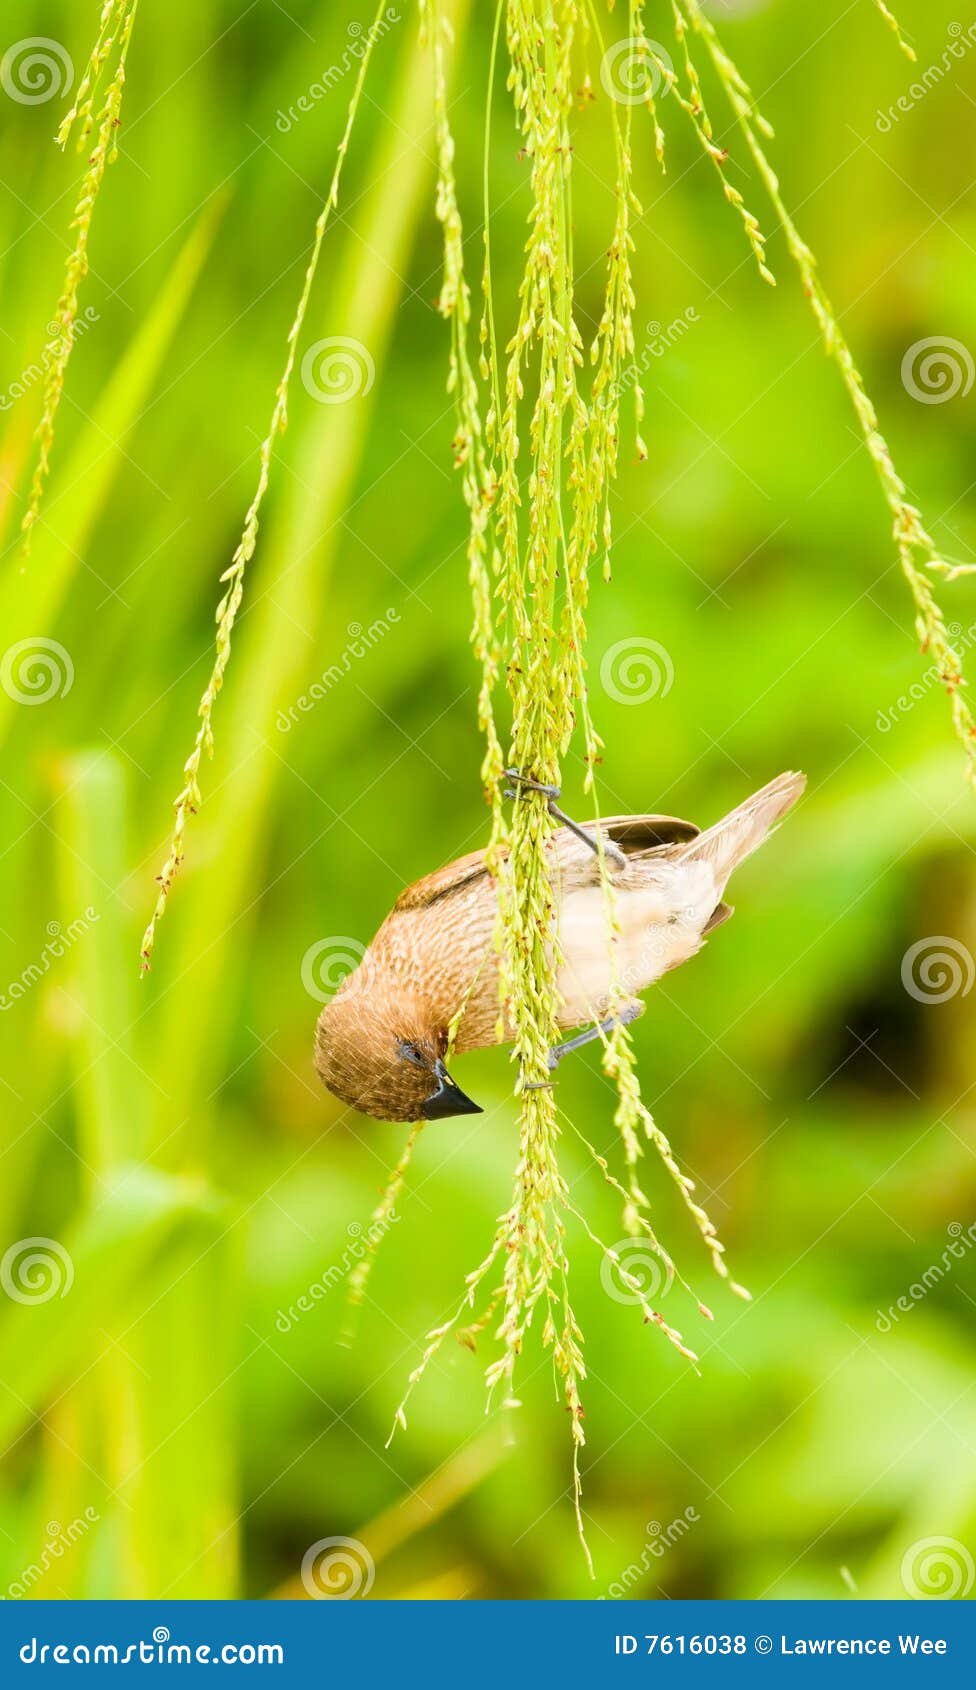 Feeding on Grass Seeds stock photo. Image of blades, feathers - 7616038